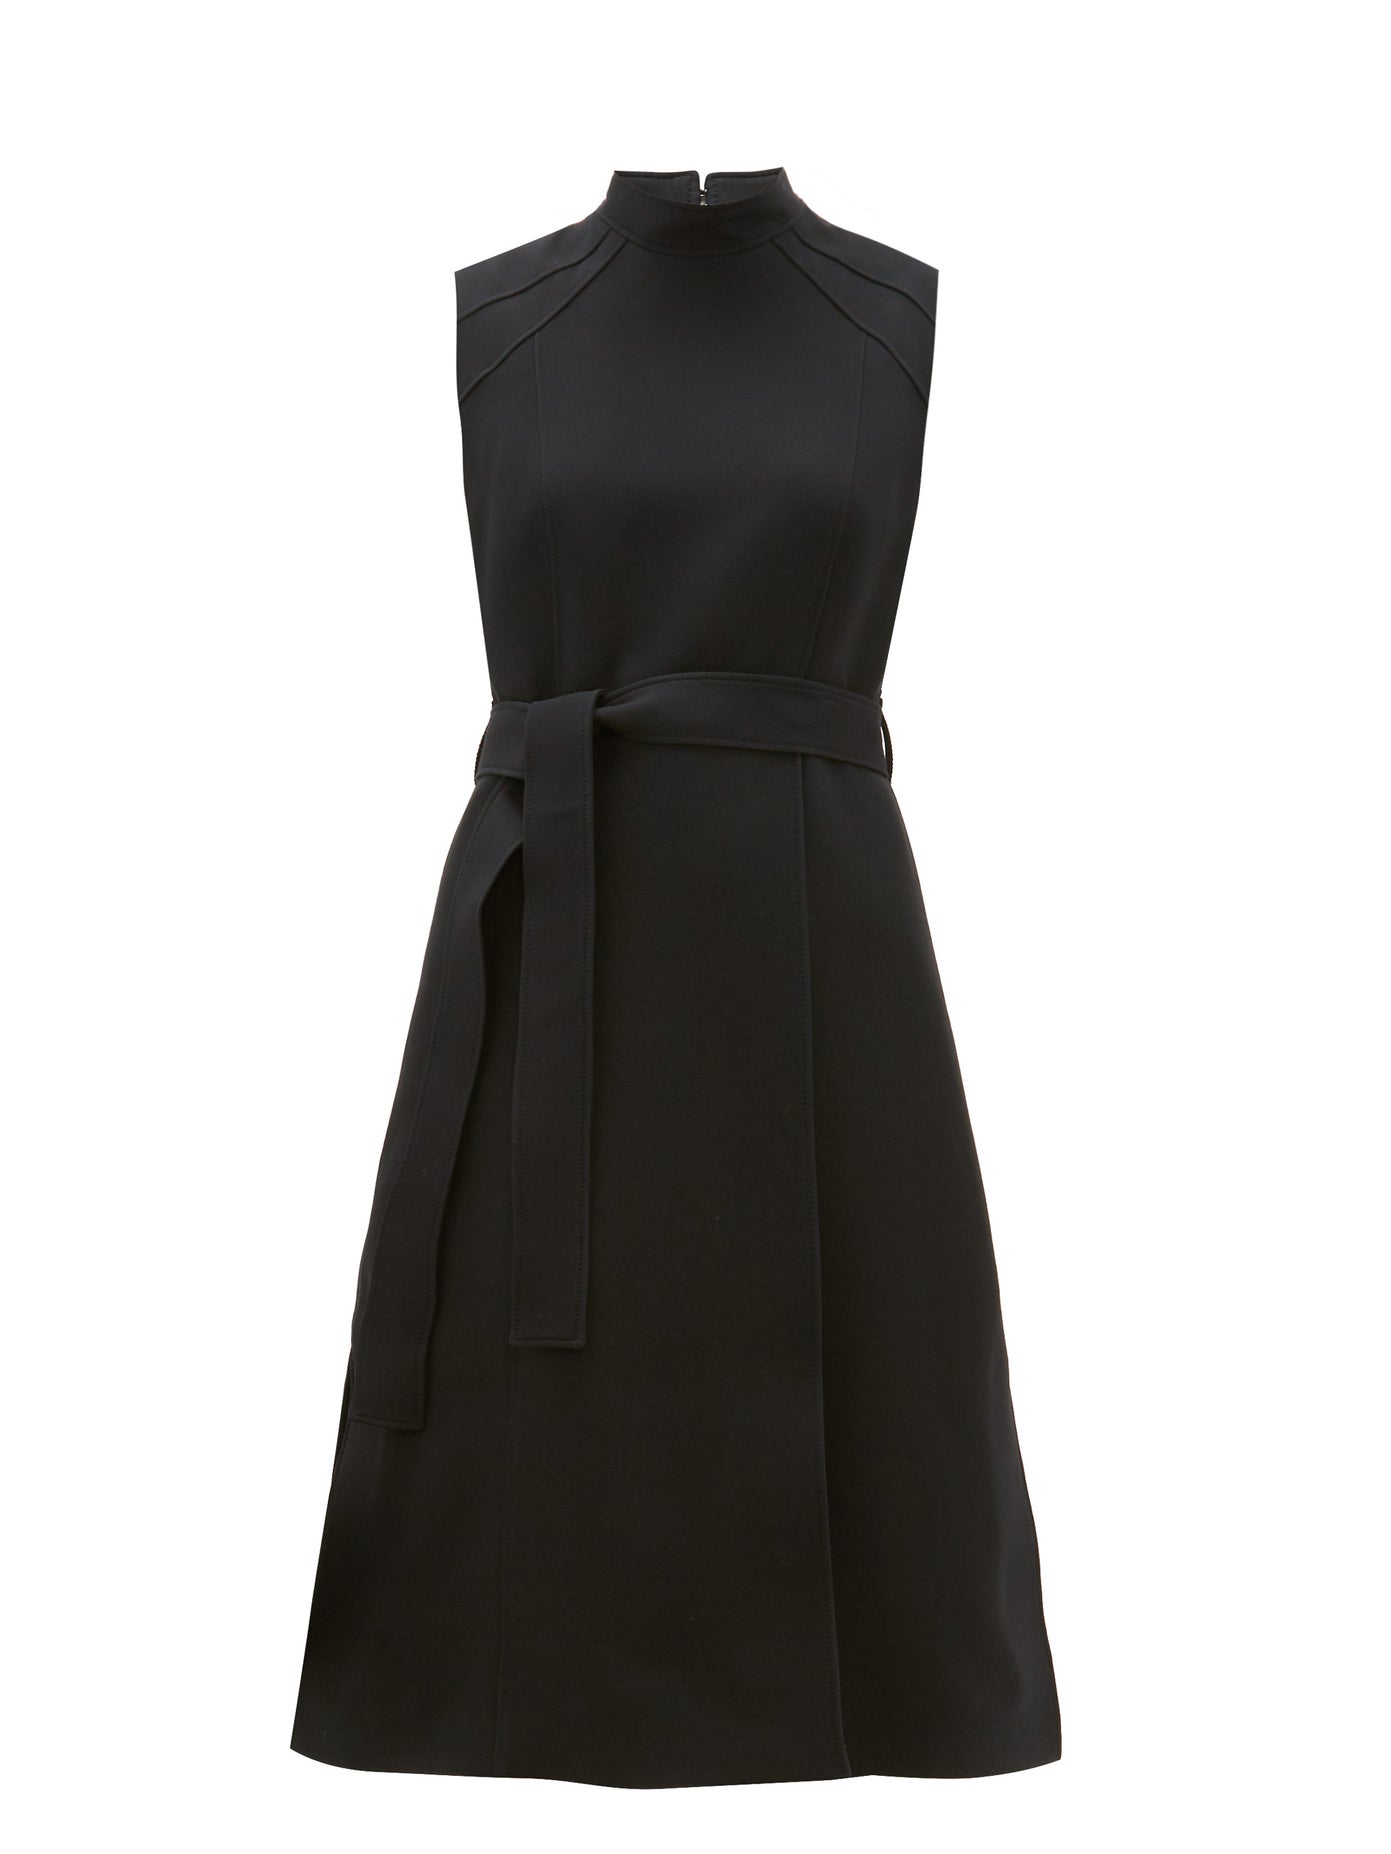 Burberry - High-Neck Belted Wool-Blend Dress | ABOUT ICONS